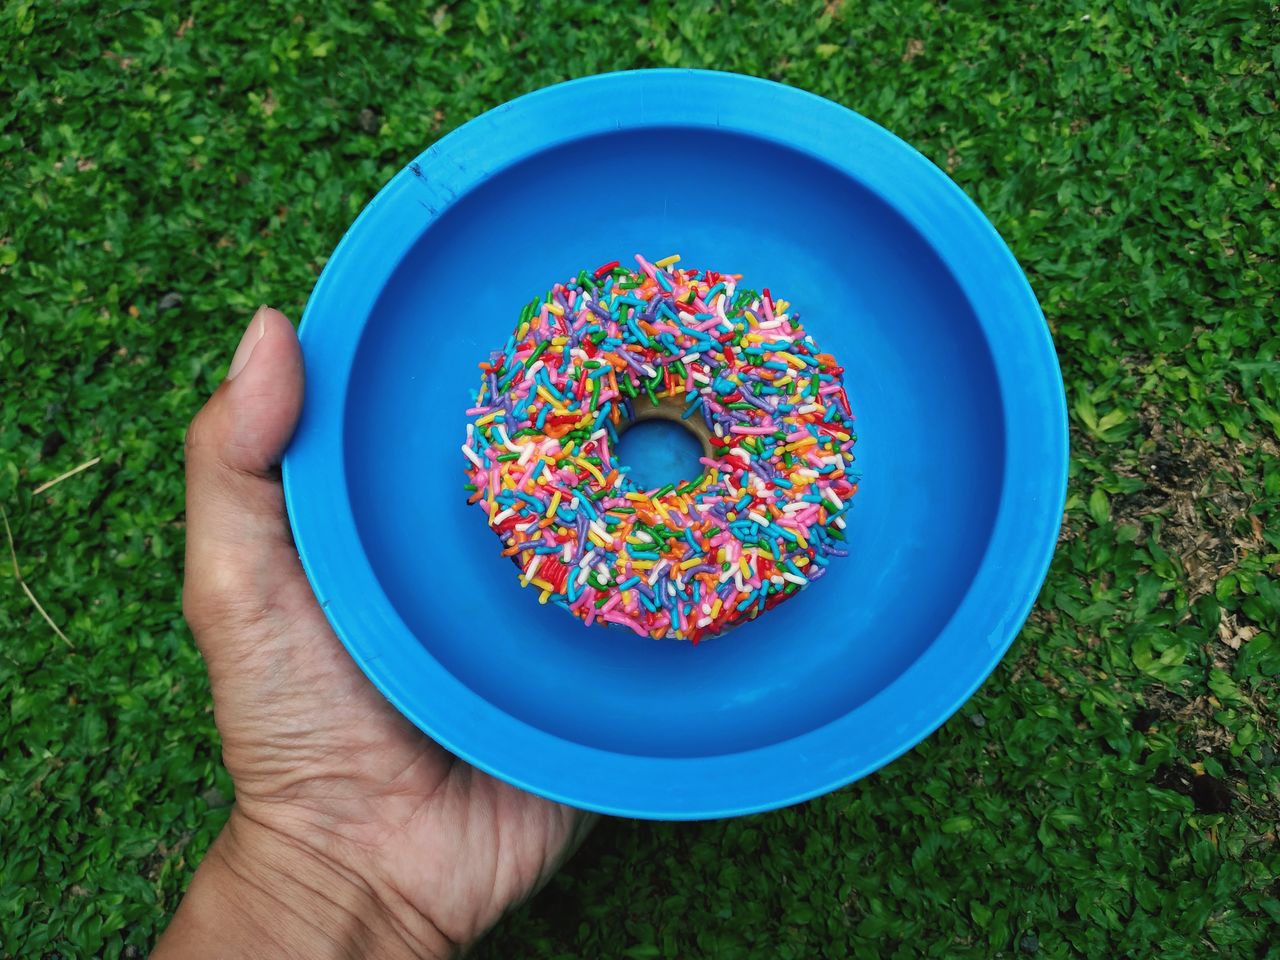 Donut with colorful sprinkles on blue plate held by hand